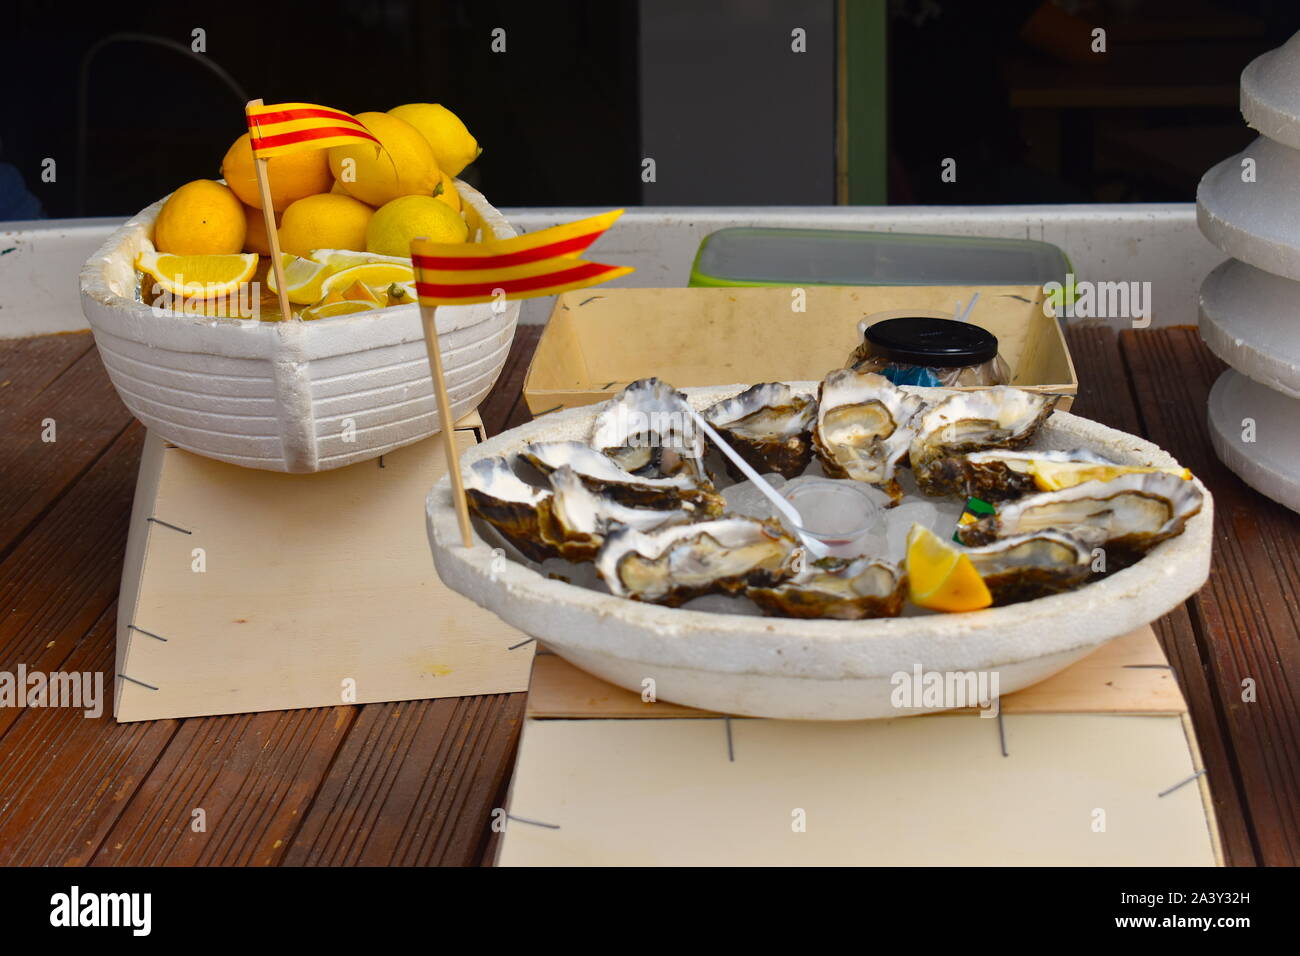 Plate full of French oysters for sale on the local market in the town centre. Bowl full of slices of lemon and Catalan flags standing out. Stock Photo